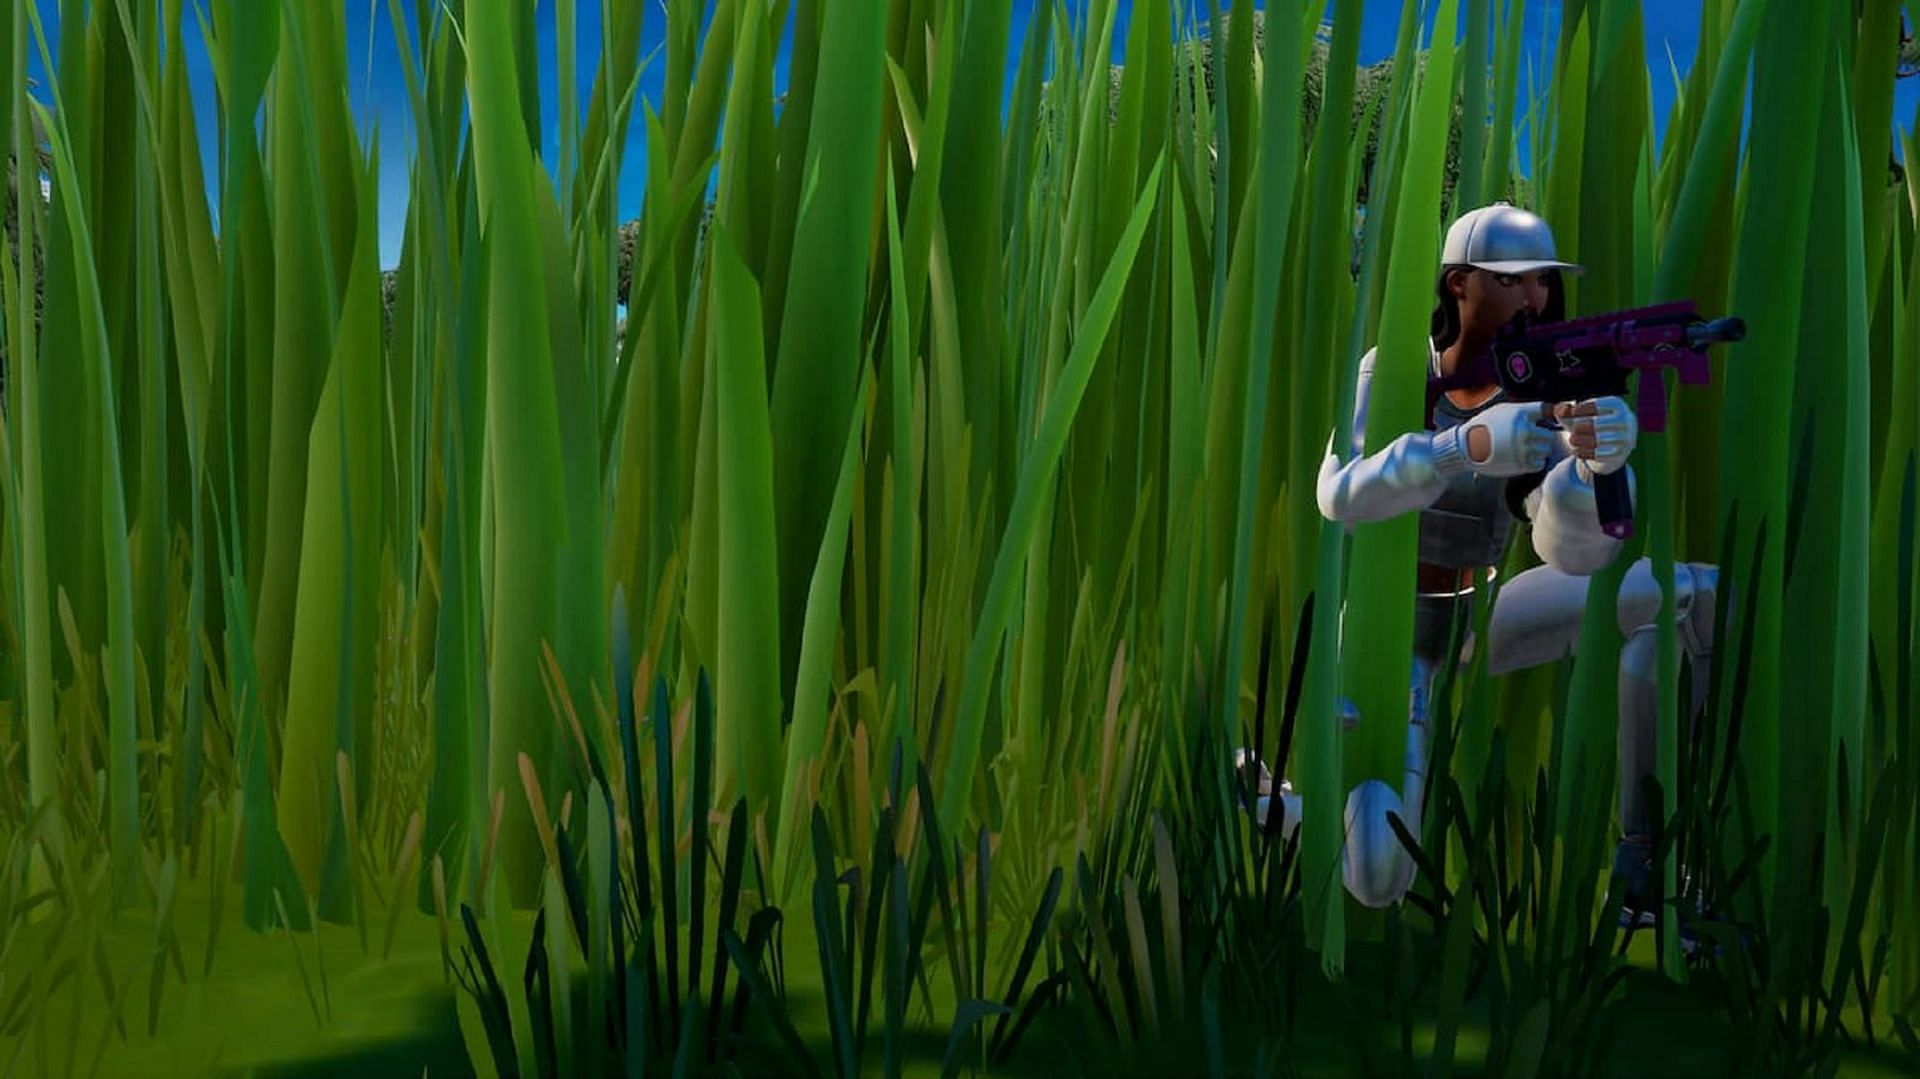 The &#039;touch grass&#039; joke seems to have come full circle in Fortnite (Image via Twitter/GiocareOra)